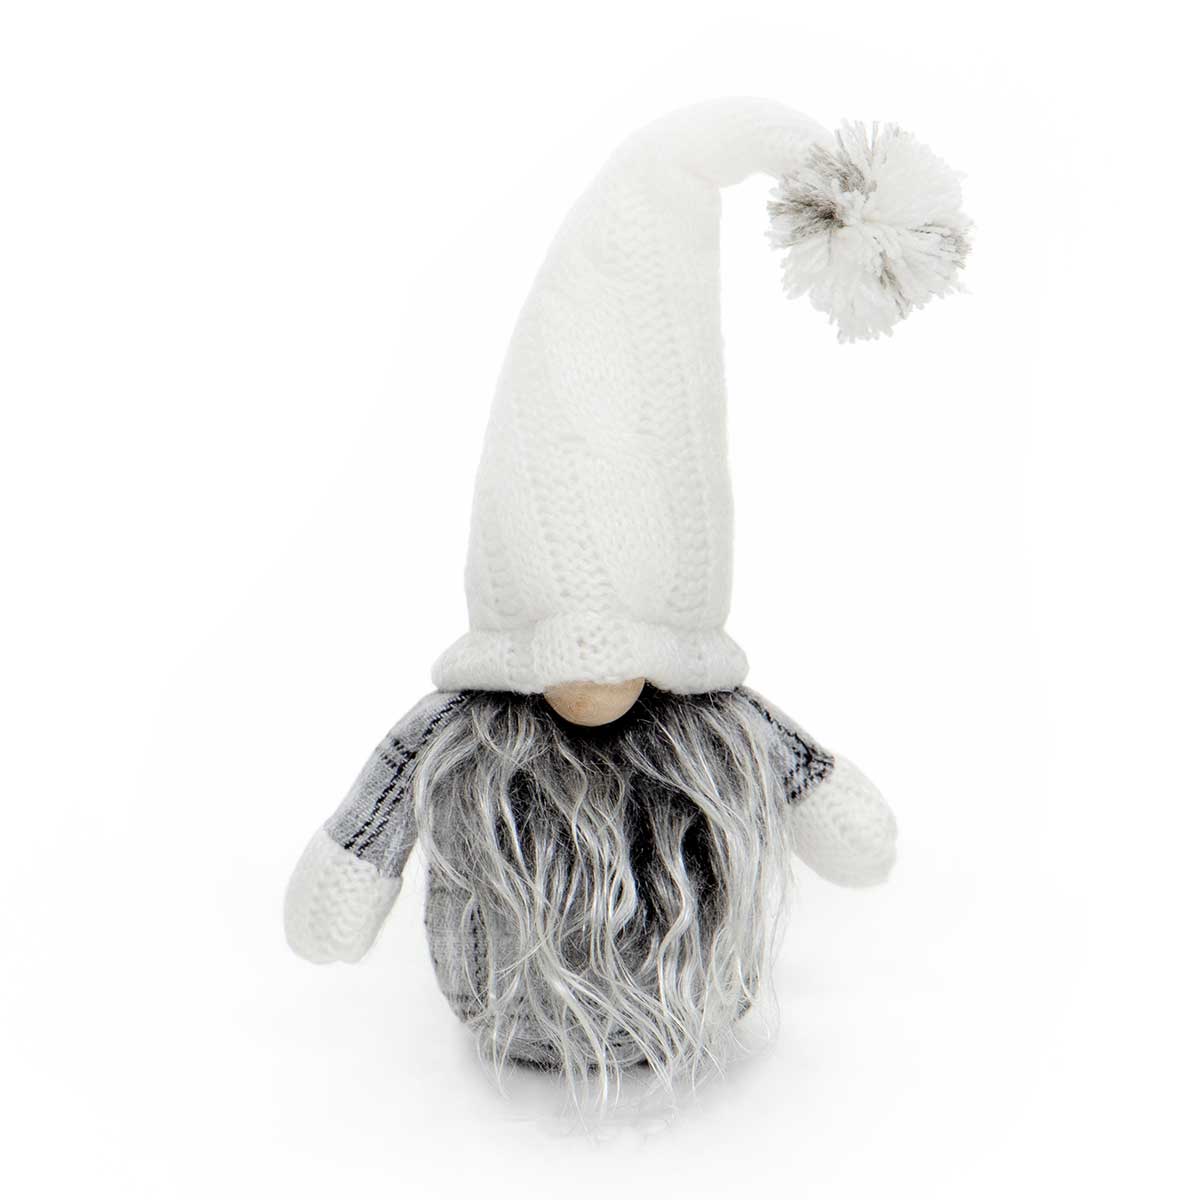 POM-POM GNOME GREY/CREAM WITH WIRED CABLE KNIT SWEATER